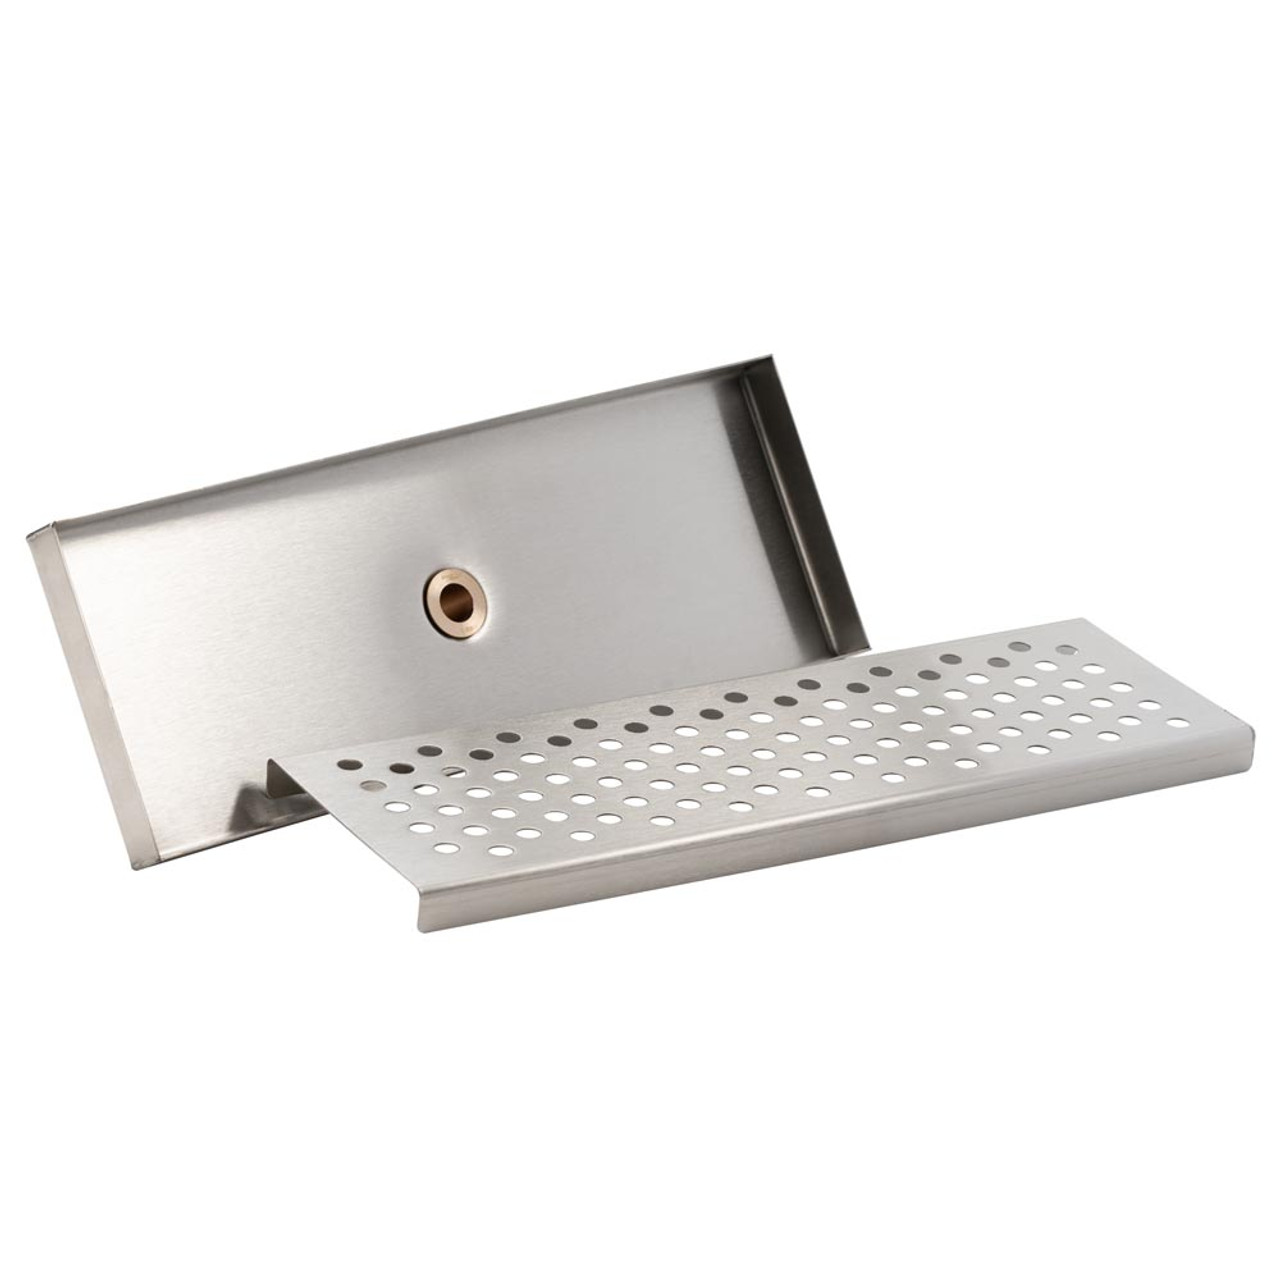 ColorLife Kitchen Counter Steel Drip Tray